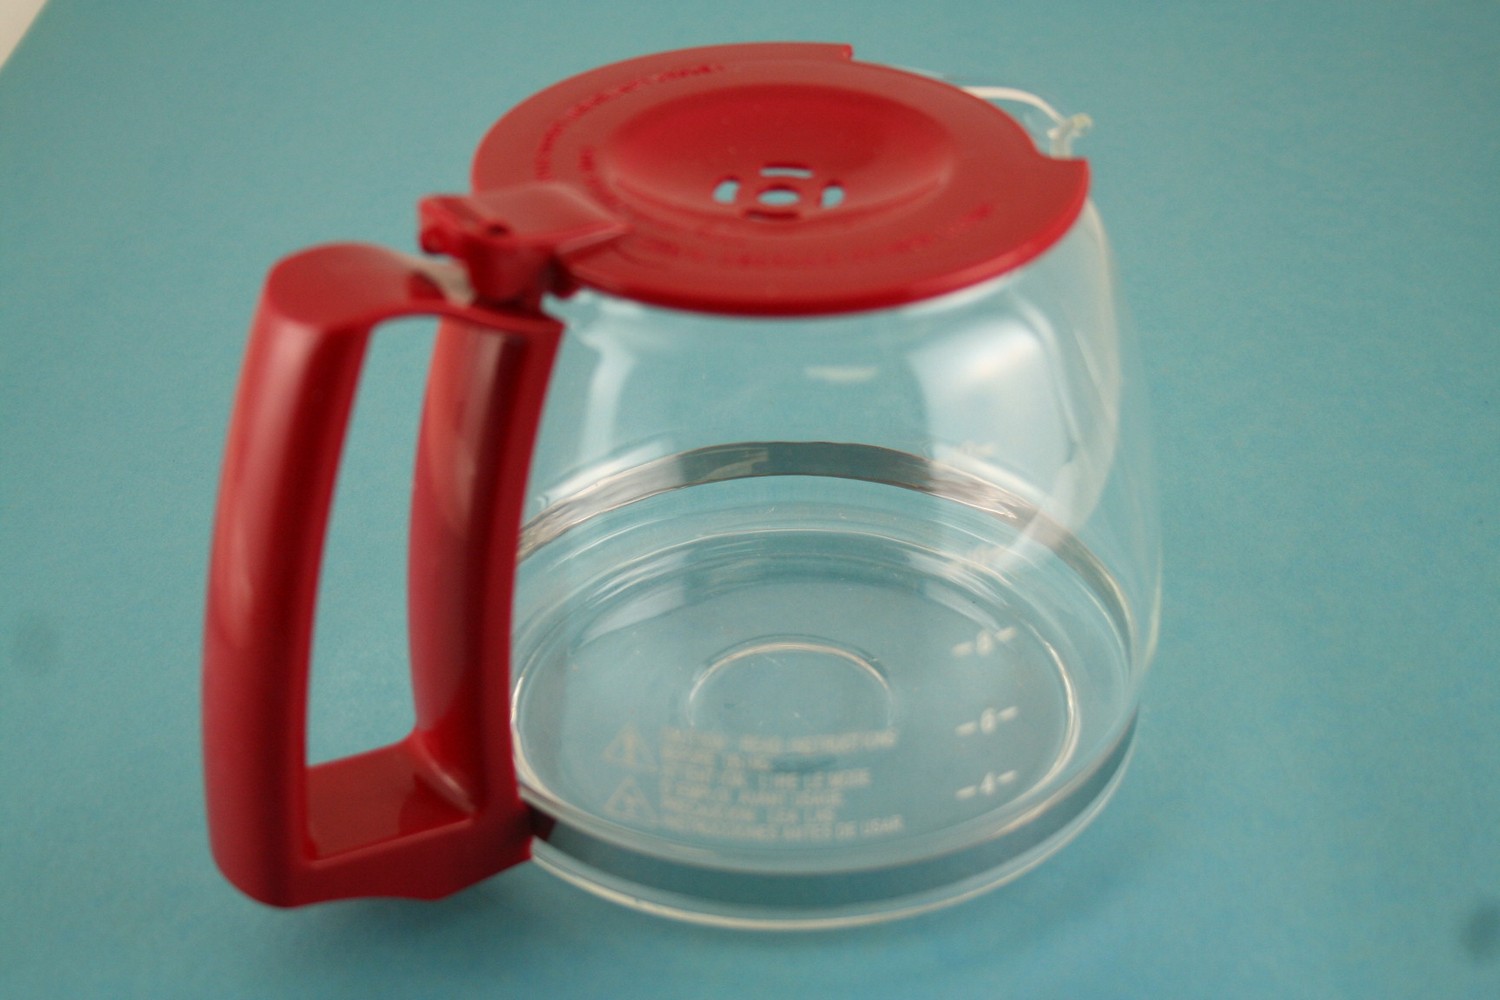 Get parts for Carafe, Complete, Red-43603